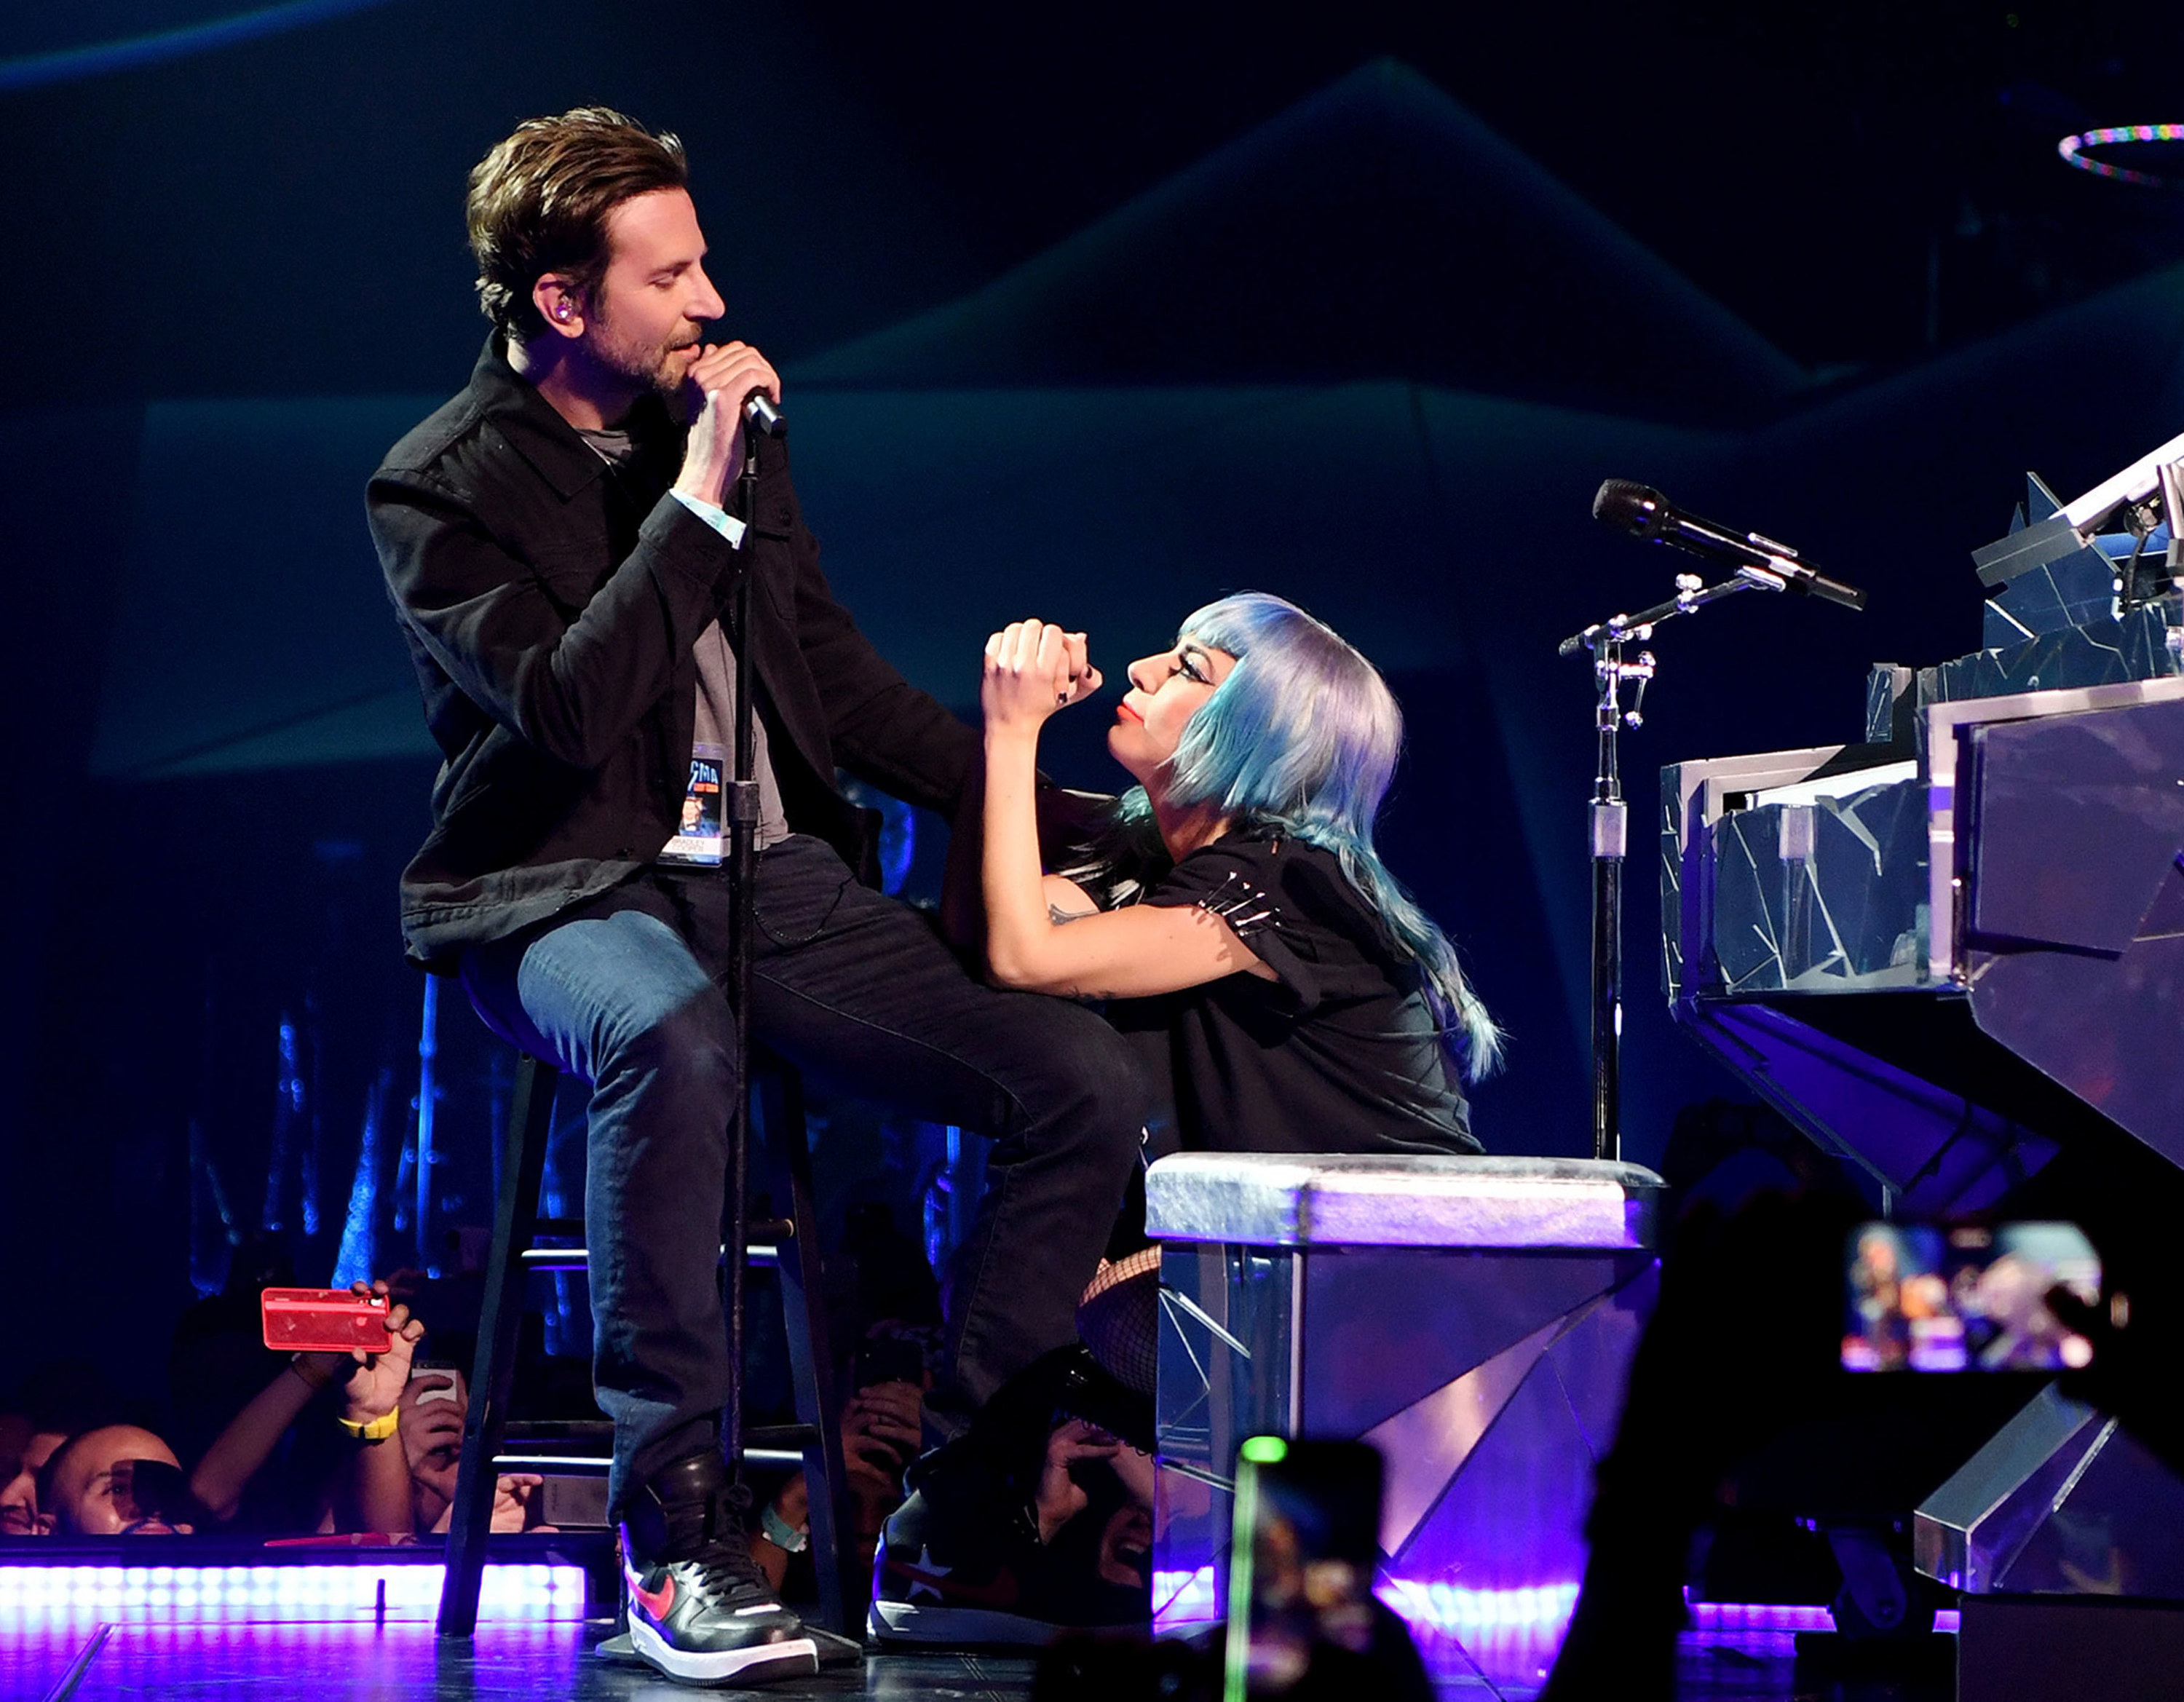 Lady Gaga performs &quot;Shallow&quot; with actor/director Bradley Cooper during her ENIGMA residency at Park Theater at Park MGM